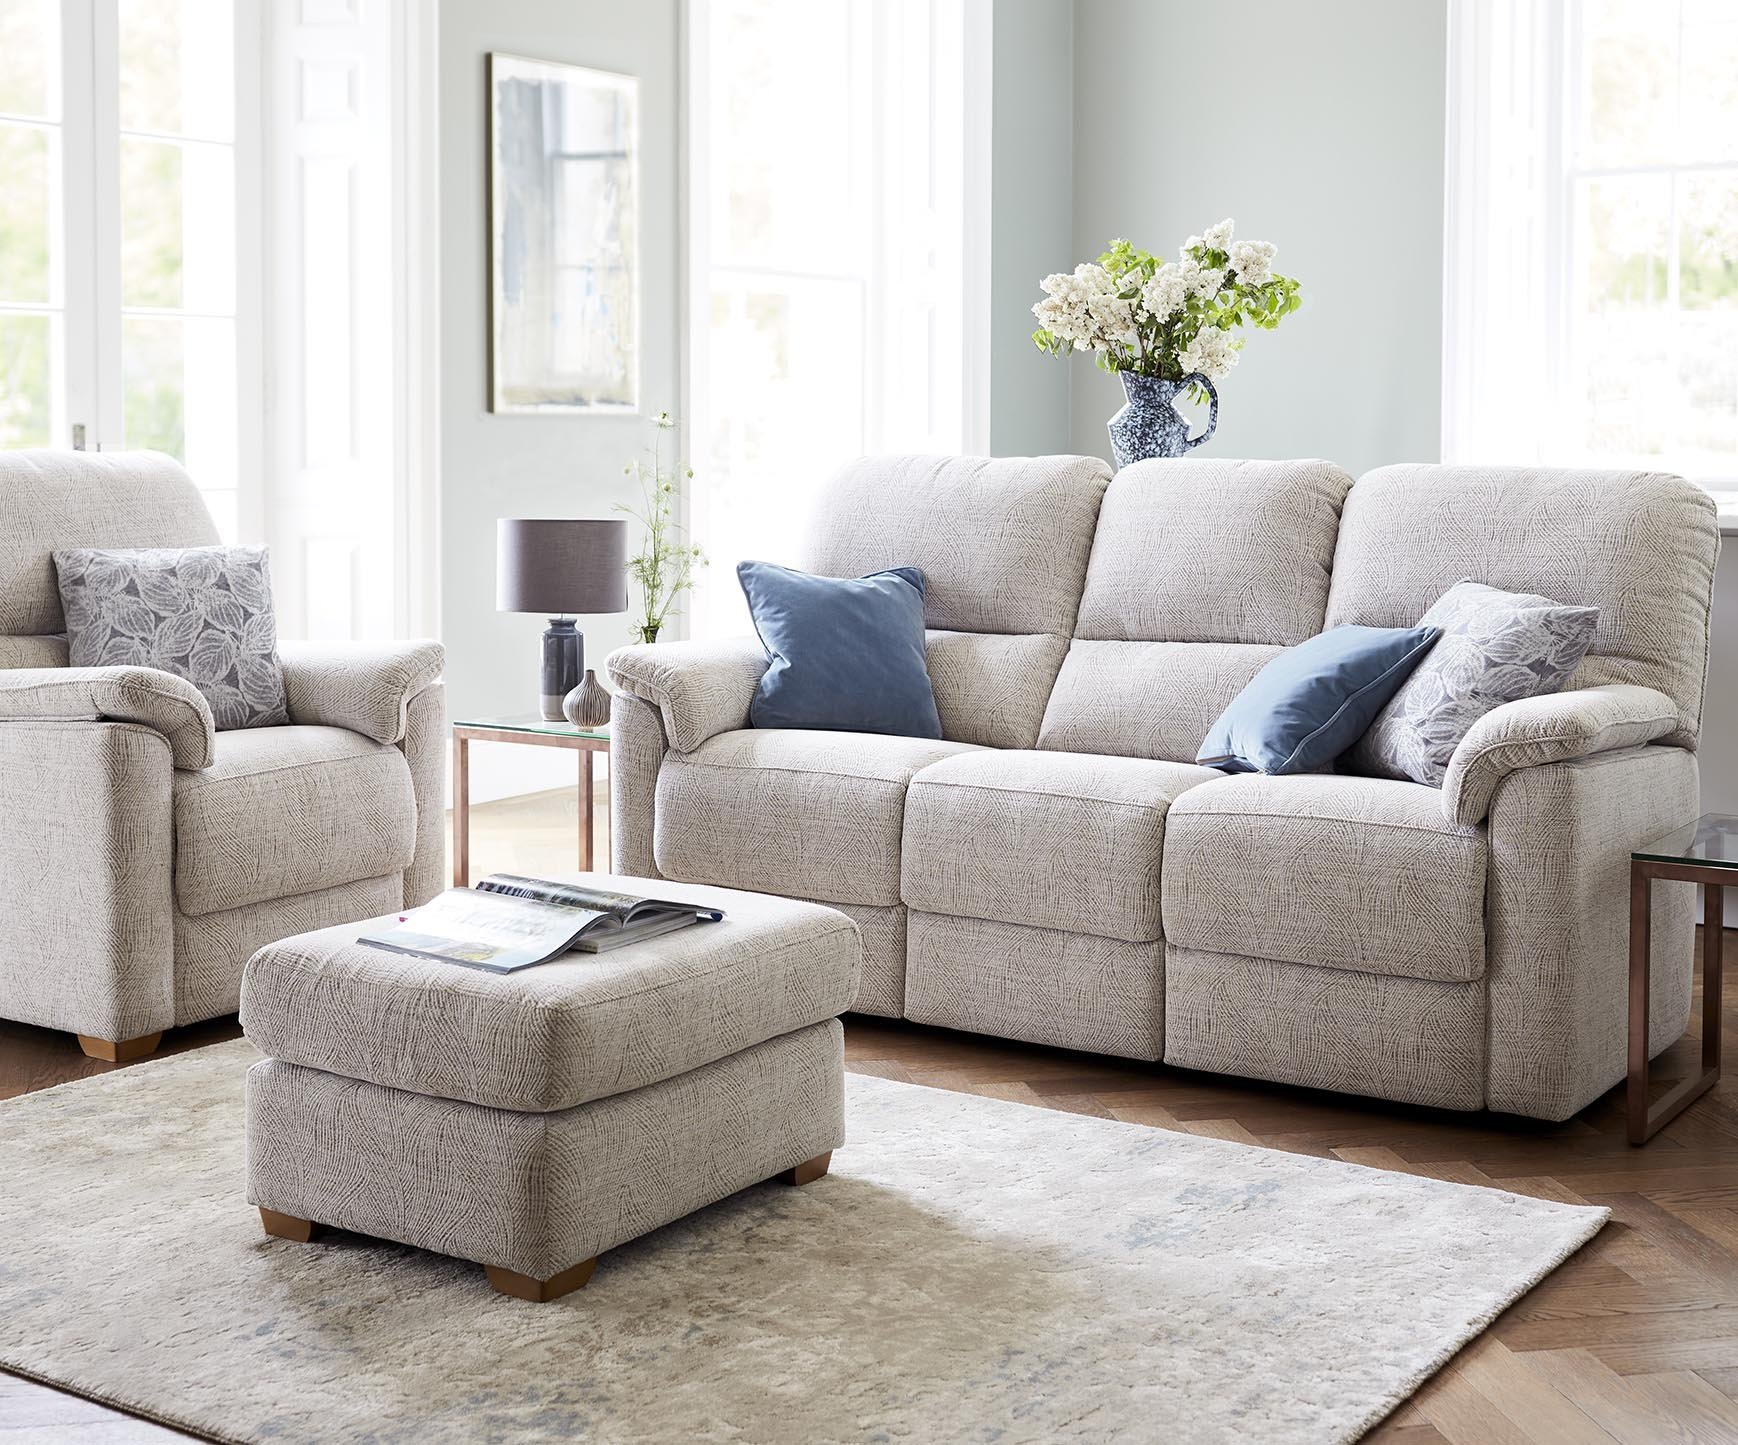 G Plan Chadwick Three Seater Double Manual Recliner Sofa | Claytons ...